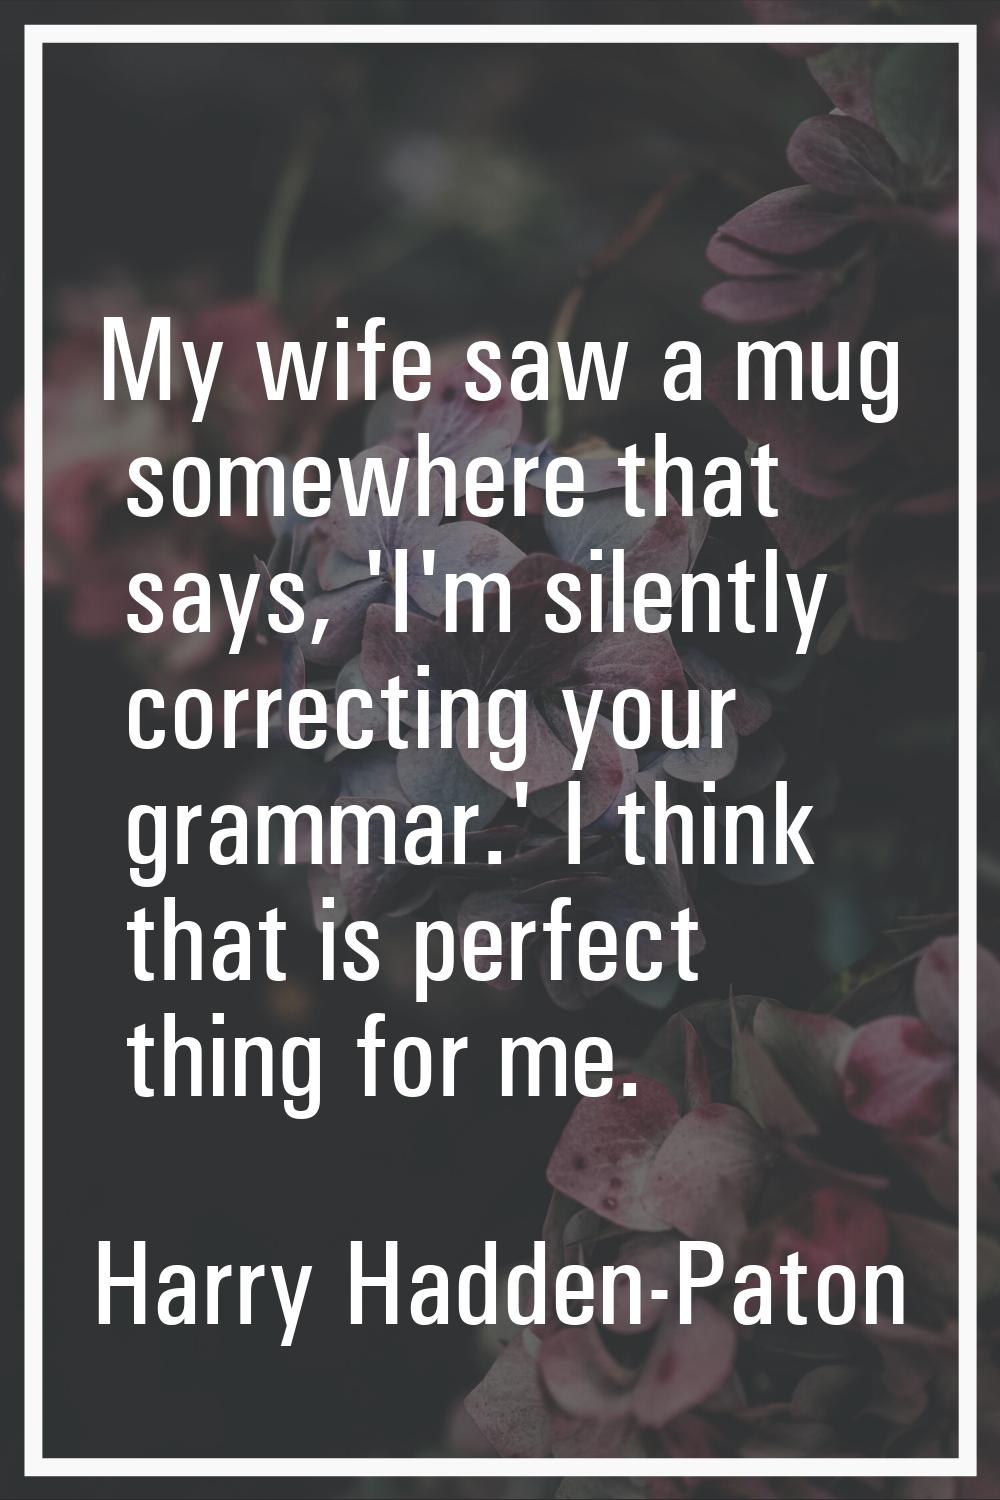 My wife saw a mug somewhere that says, 'I'm silently correcting your grammar.' I think that is perf